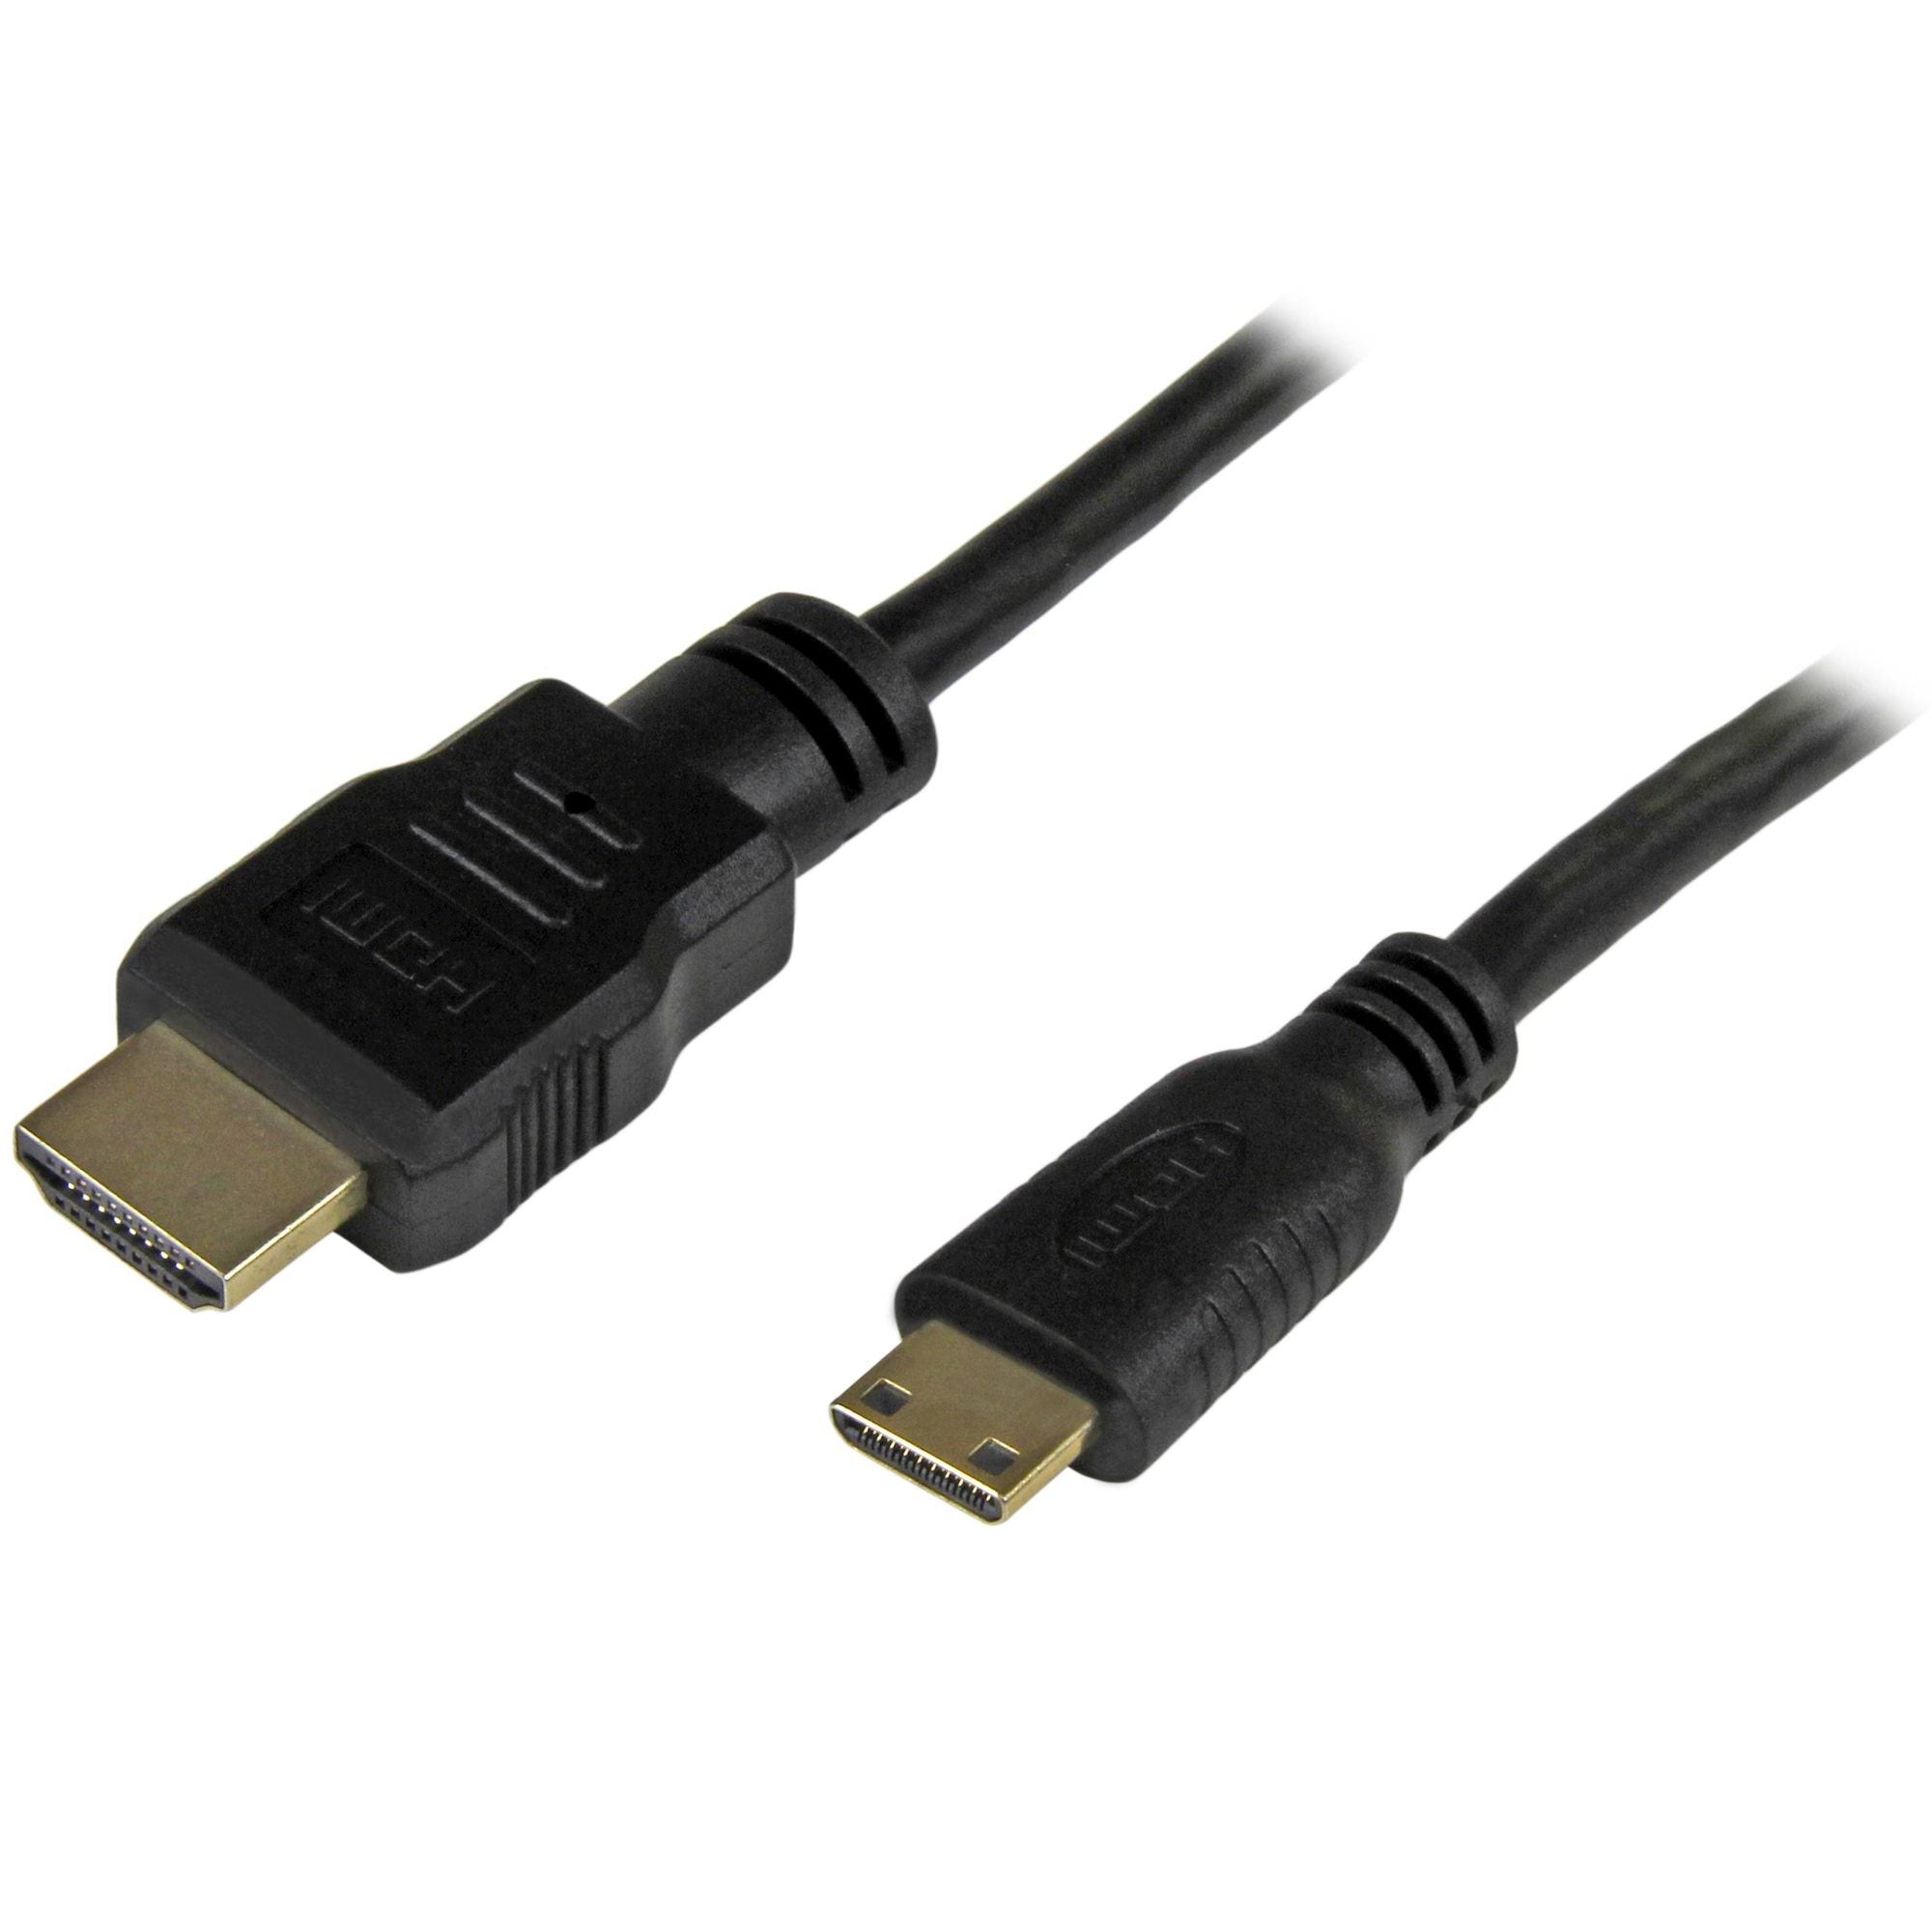 Startech High Speed Hdmi Cable With Ethernet - 6'